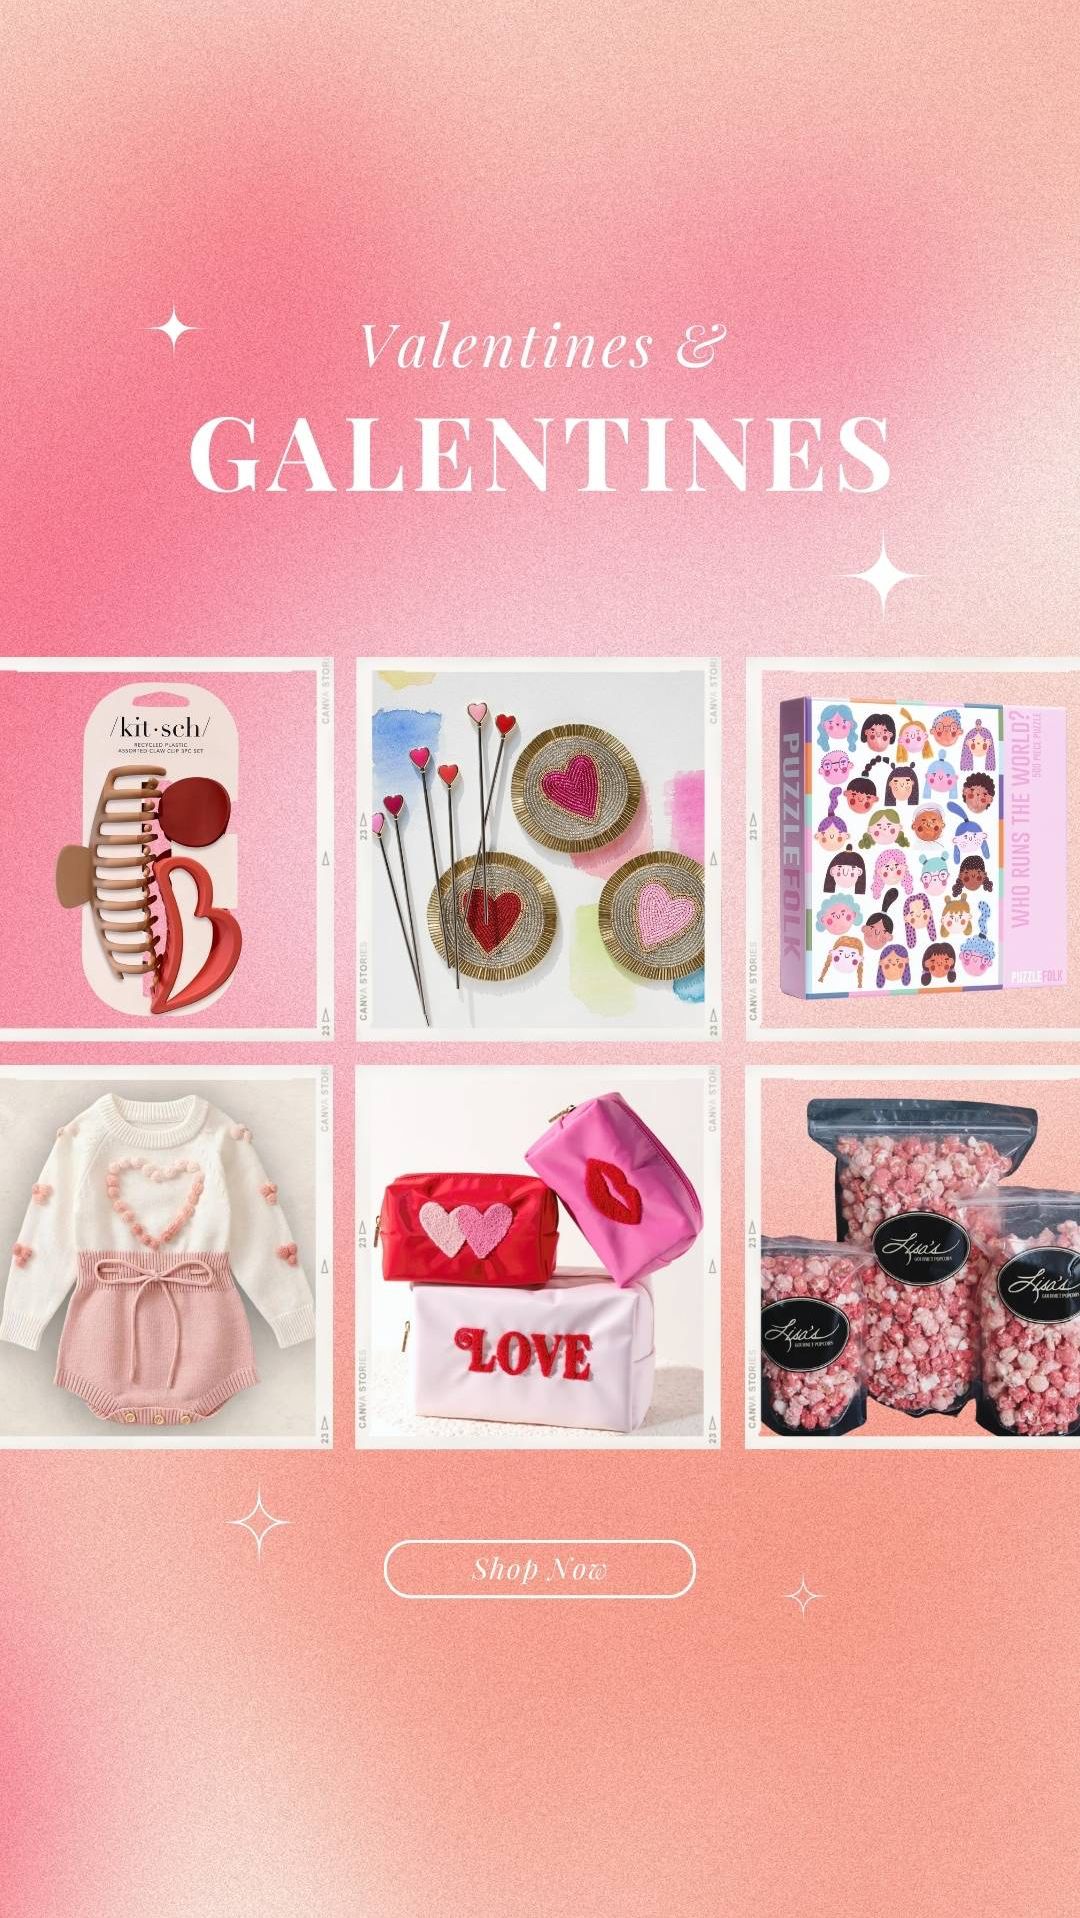 Image for Galentines + Valentines